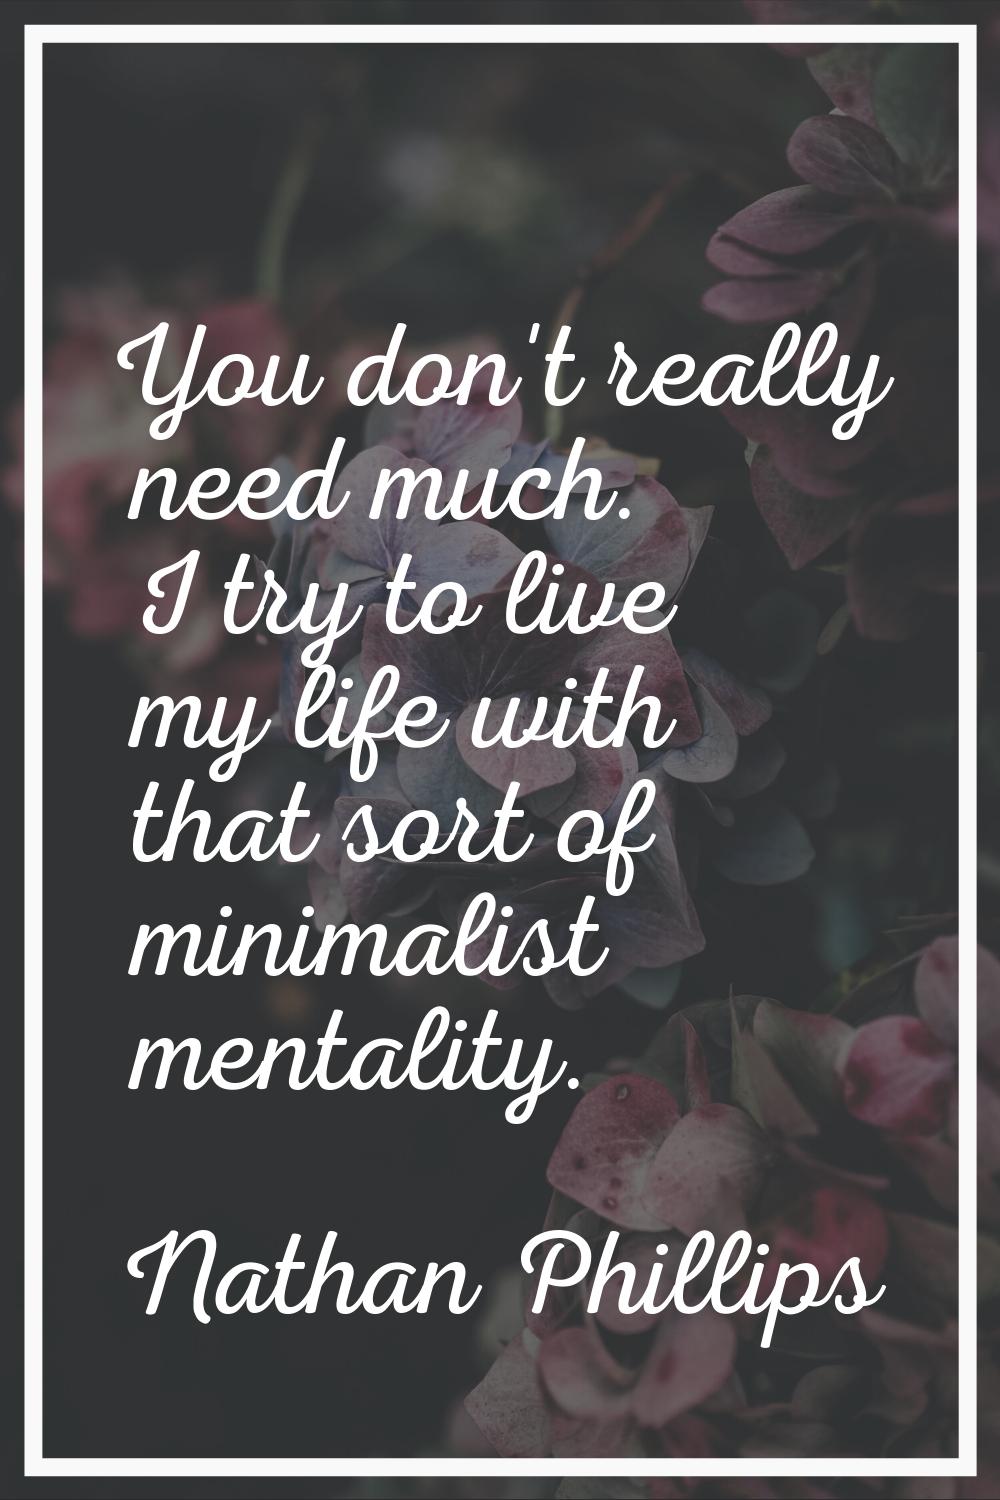 You don't really need much. I try to live my life with that sort of minimalist mentality.